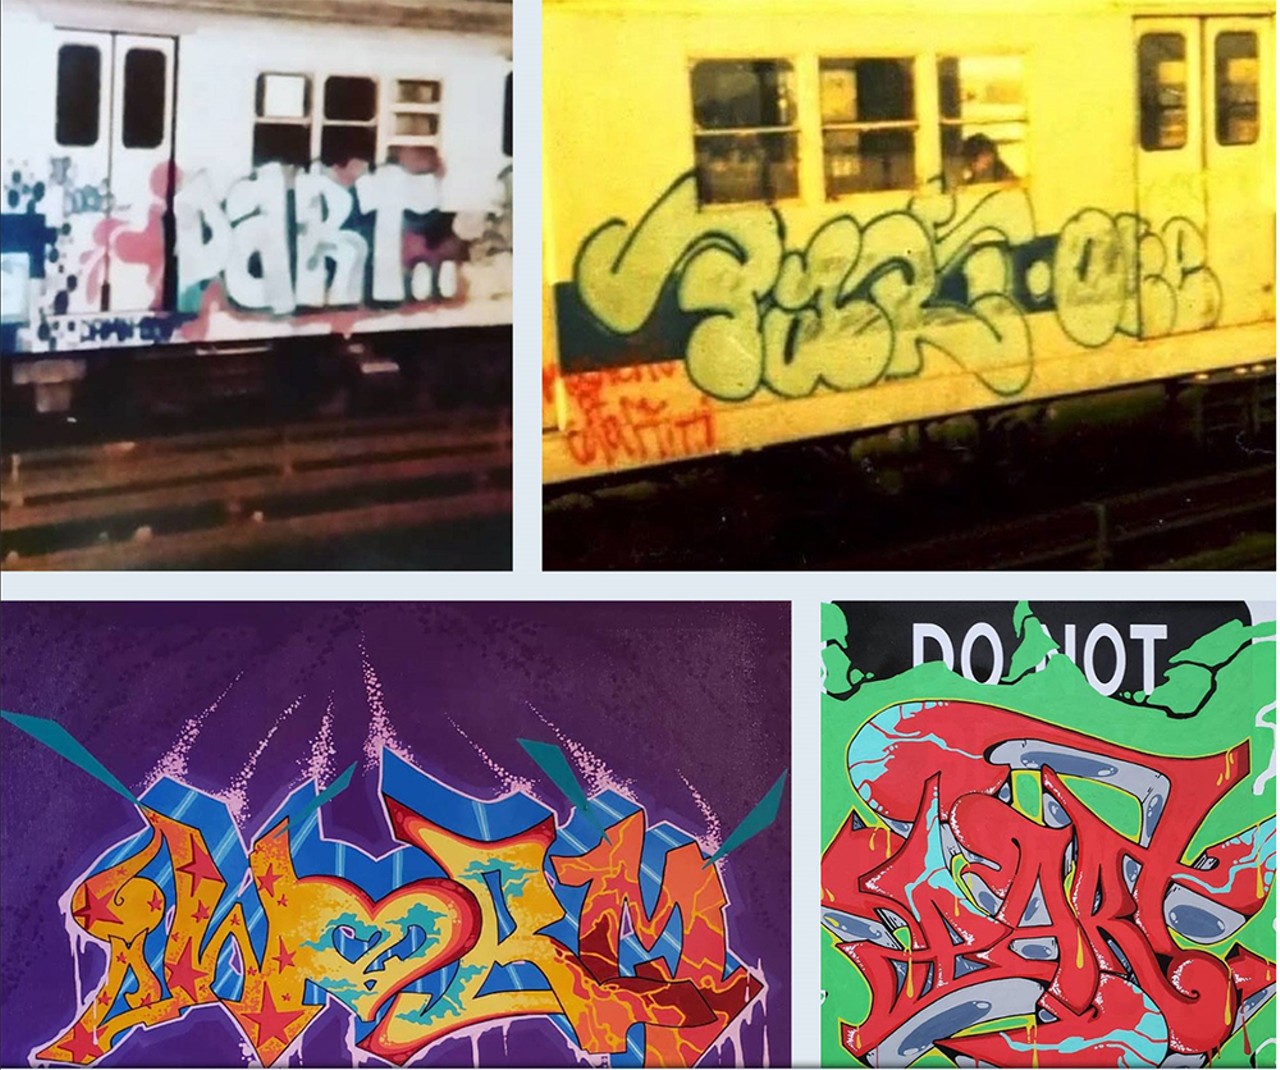 Check out some New York-style graffiti at Mergeculture in Tampa HeightsPart 1 is going to be in town. He was a pioneer of wildstyle graffiti in the 1970s and you can actually meet him at this event.Sat., Feb. 16
Photo via the Facebook event page